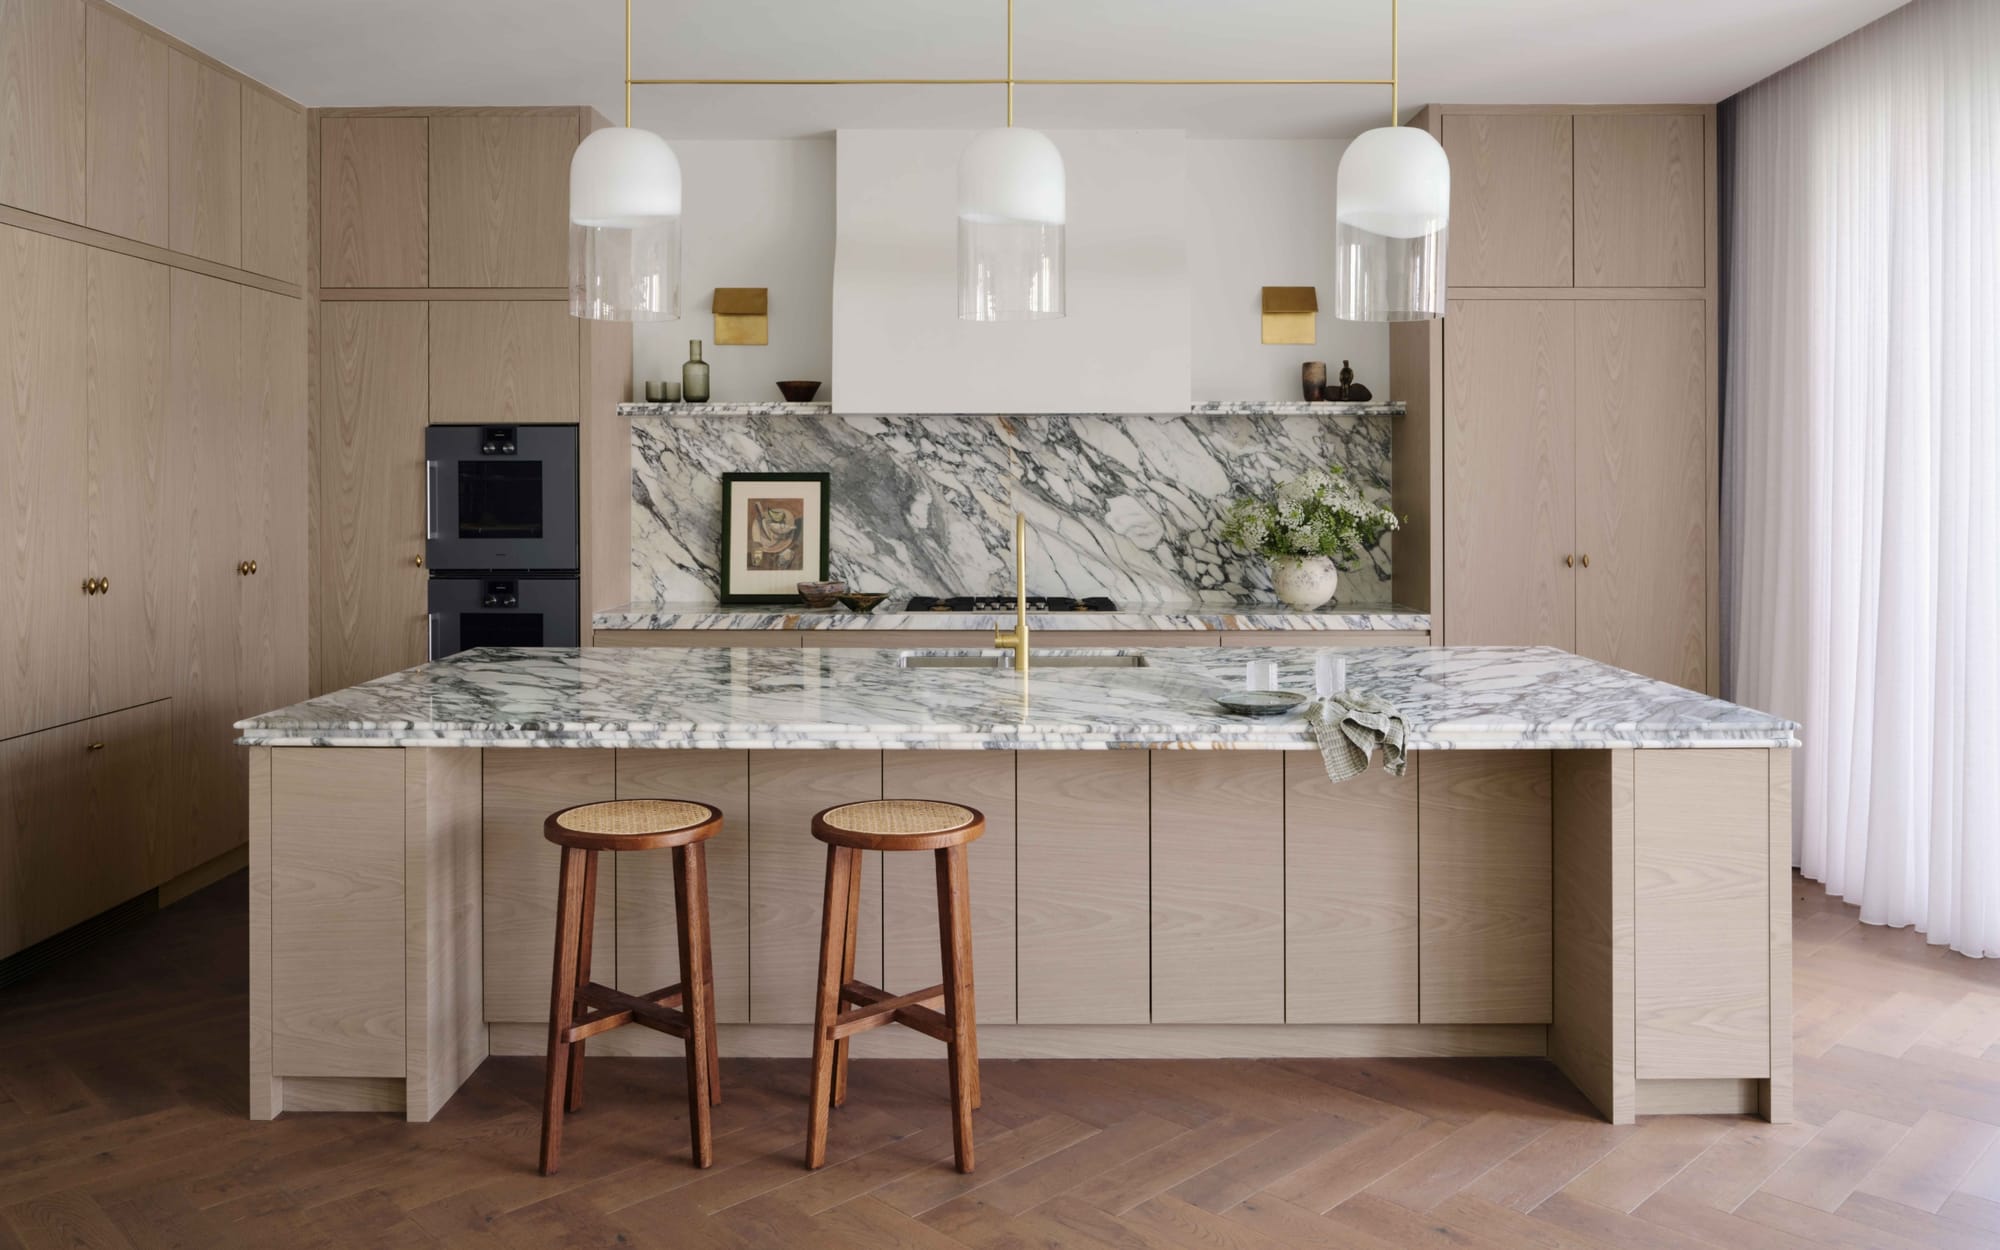 Light House by Smac Studio. Photography by Dave Wheeler. Landscape image of residential kitchen.